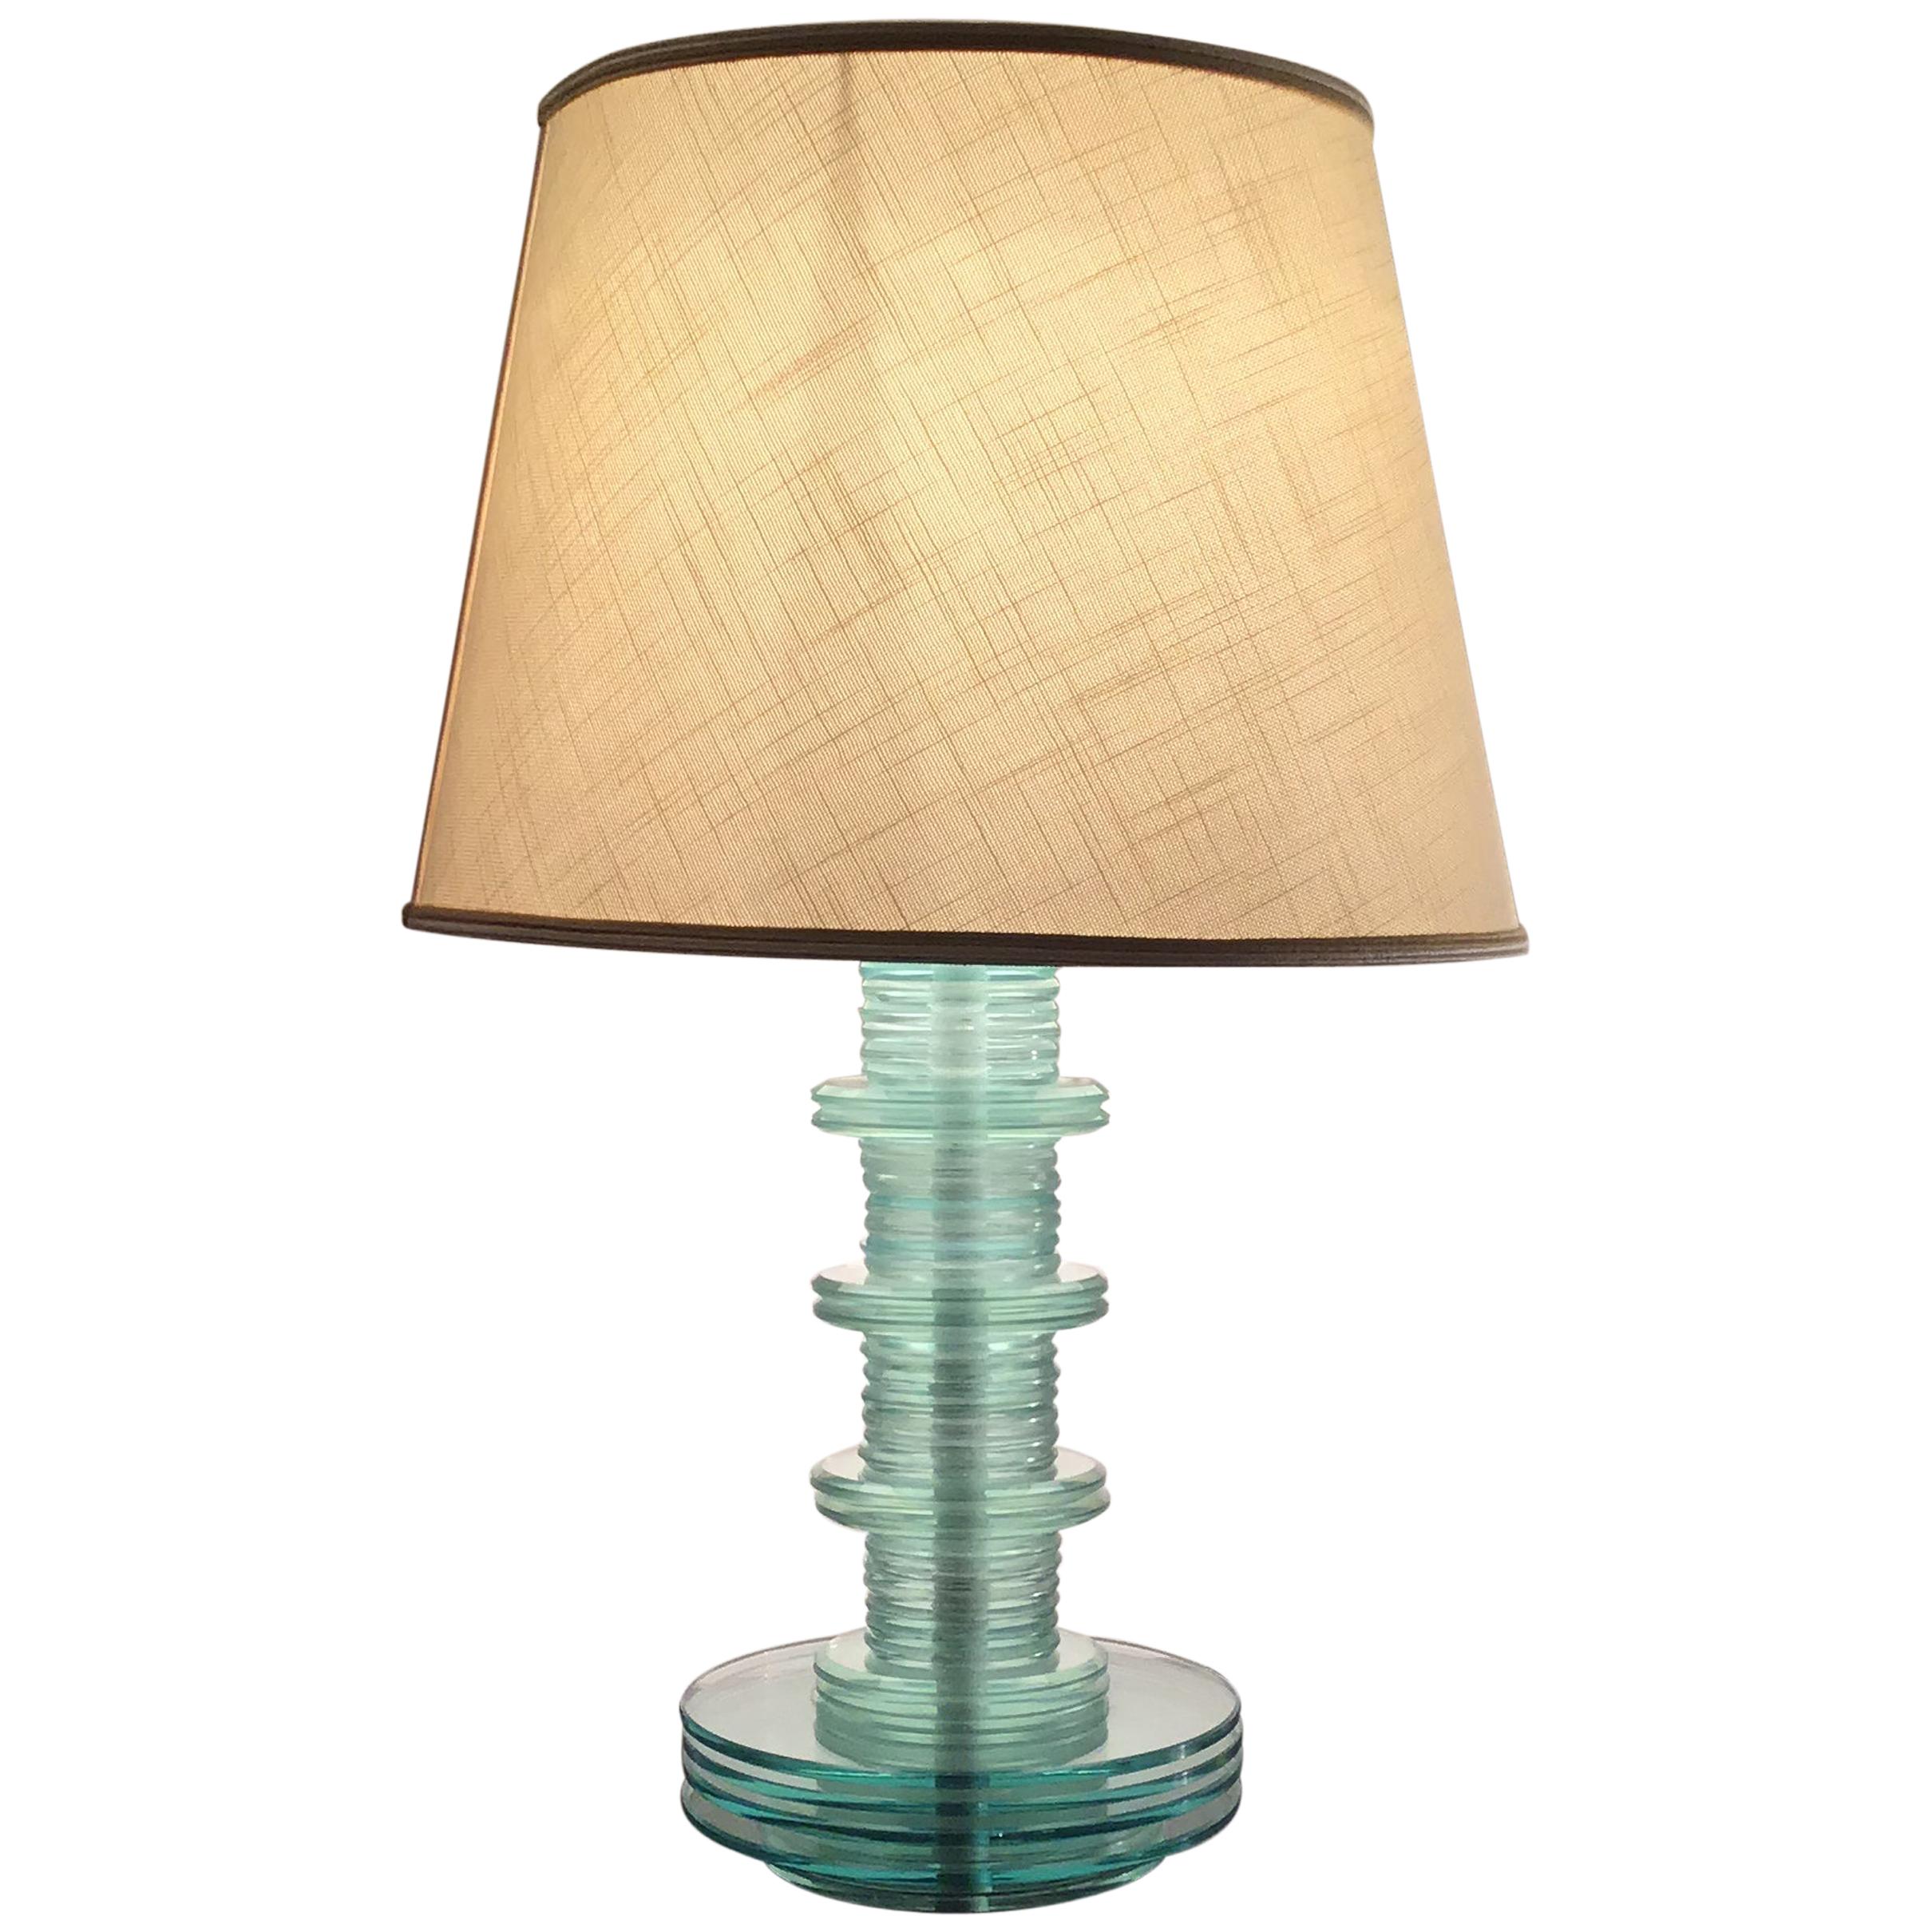 Cristal Art Table Lamp Glass Iron Fabric Lampshade, 1960, Italy For Sale